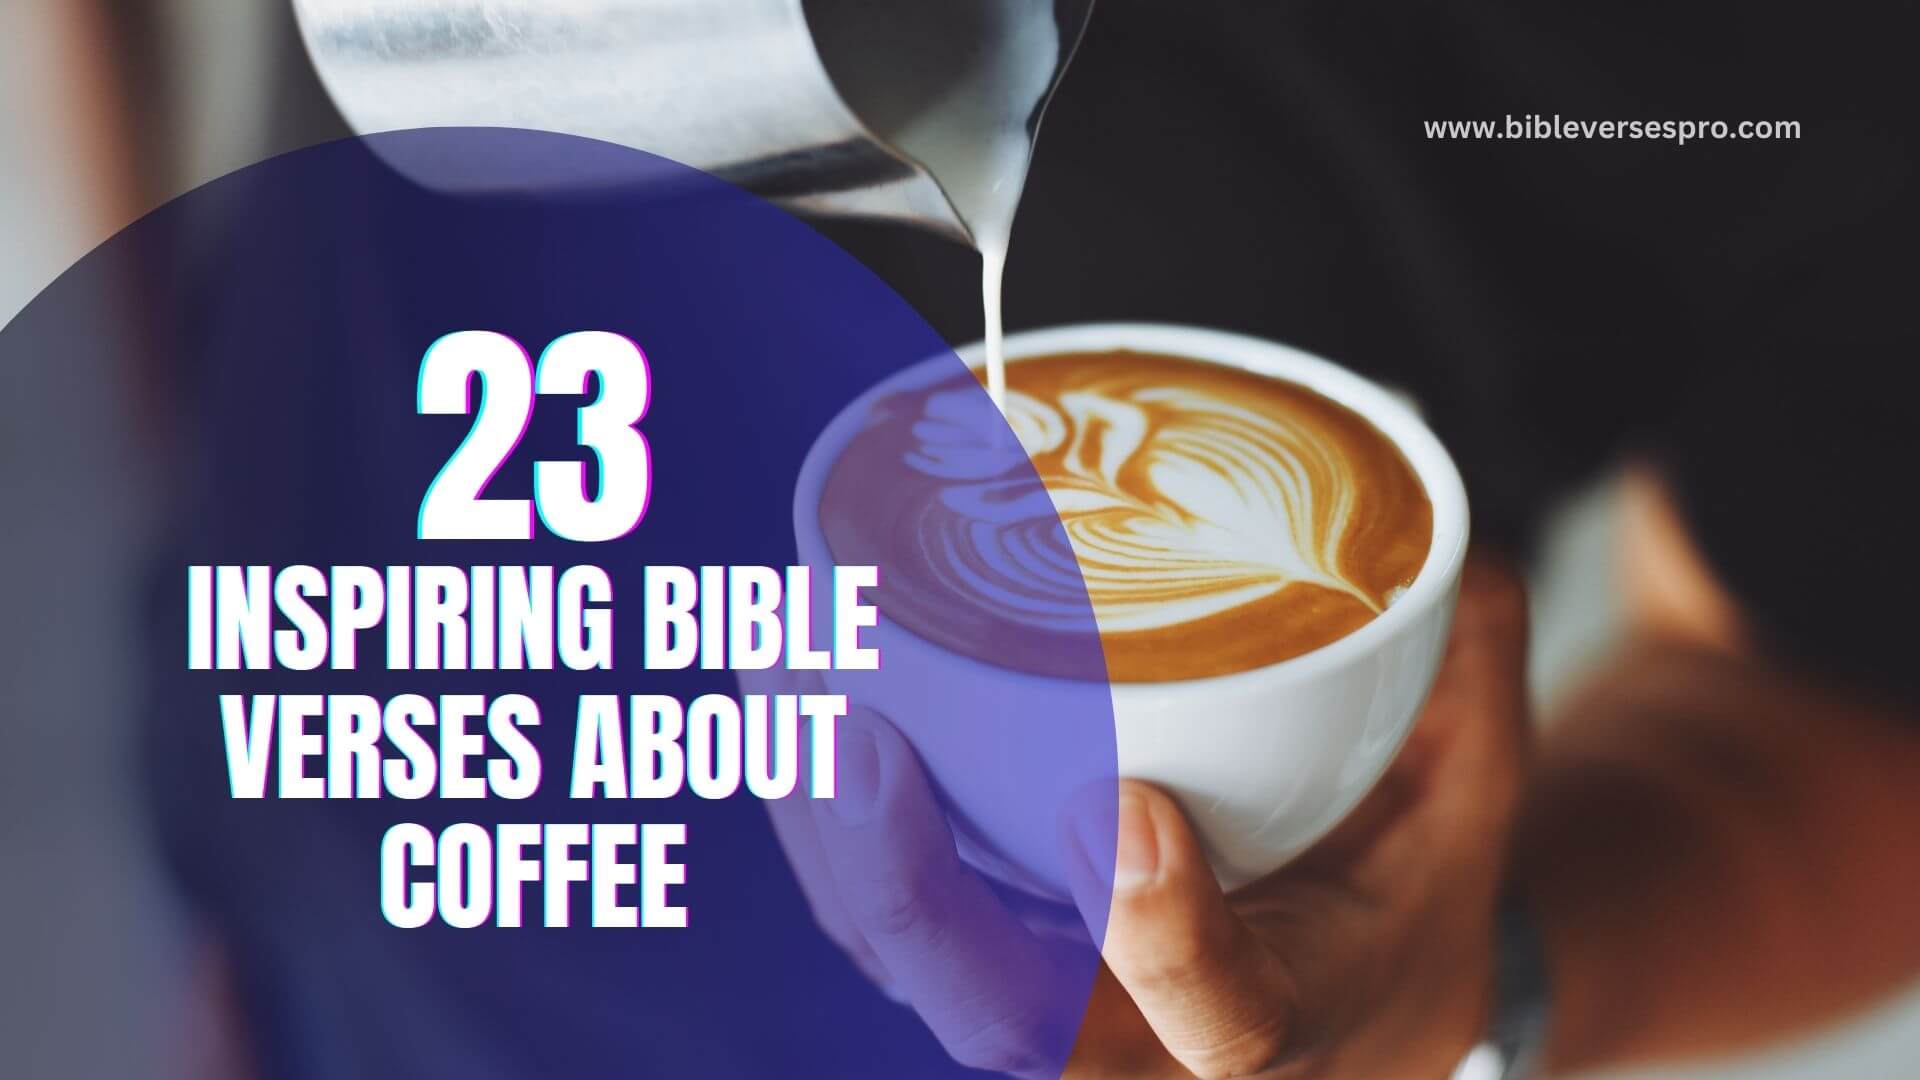 INSPIRING BIBLE VERSES ABOUT COFFEE (1)